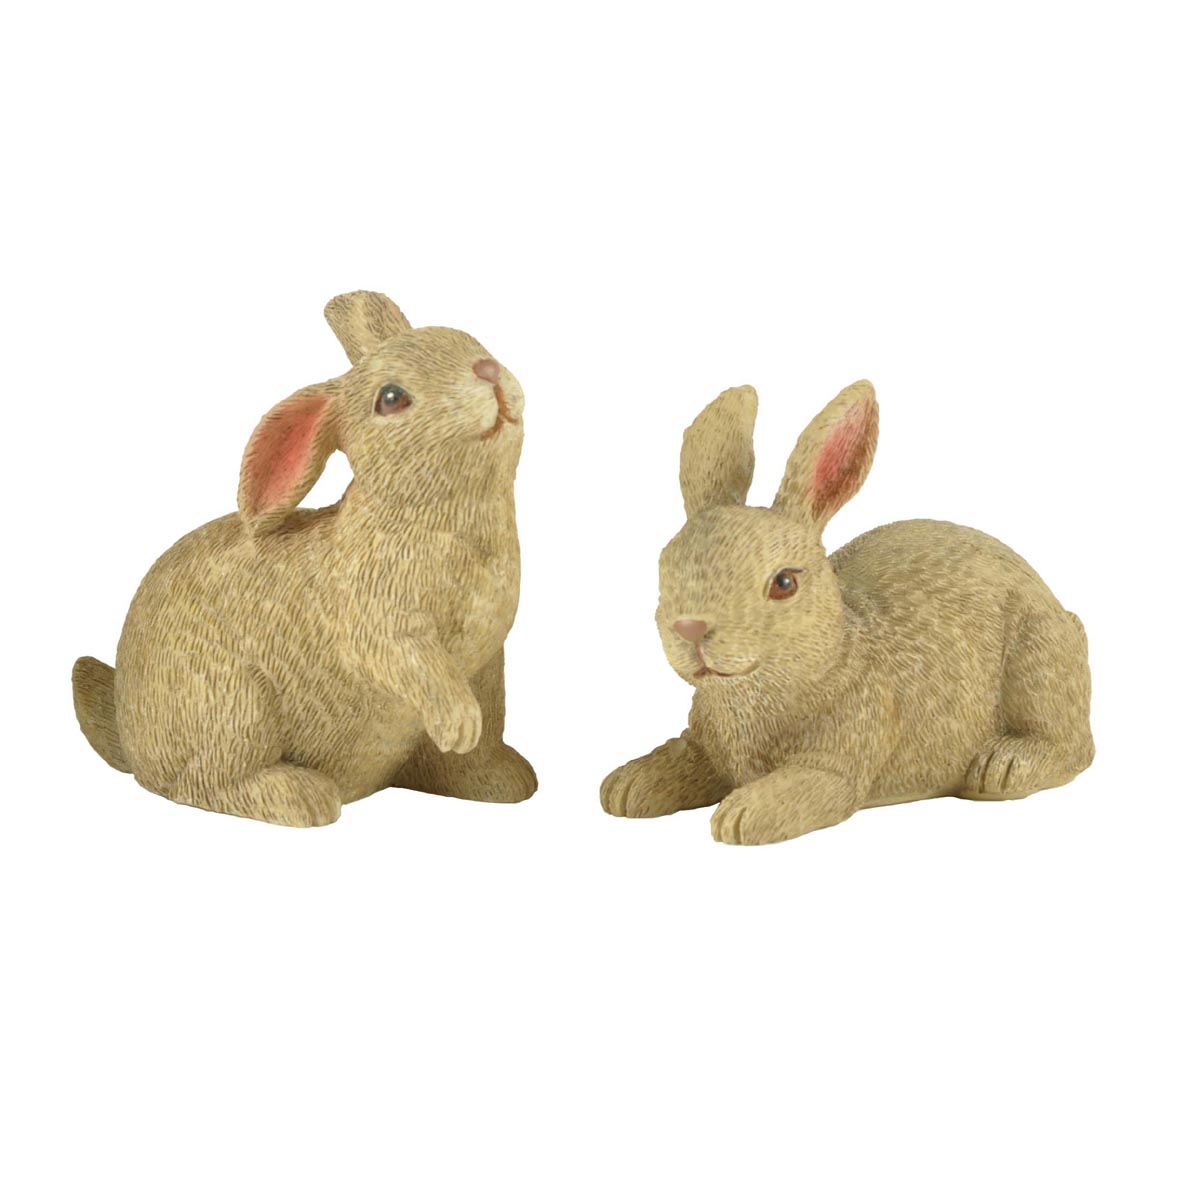 Ennas hot-sale easter rabbit figurines top brand for holiday gift